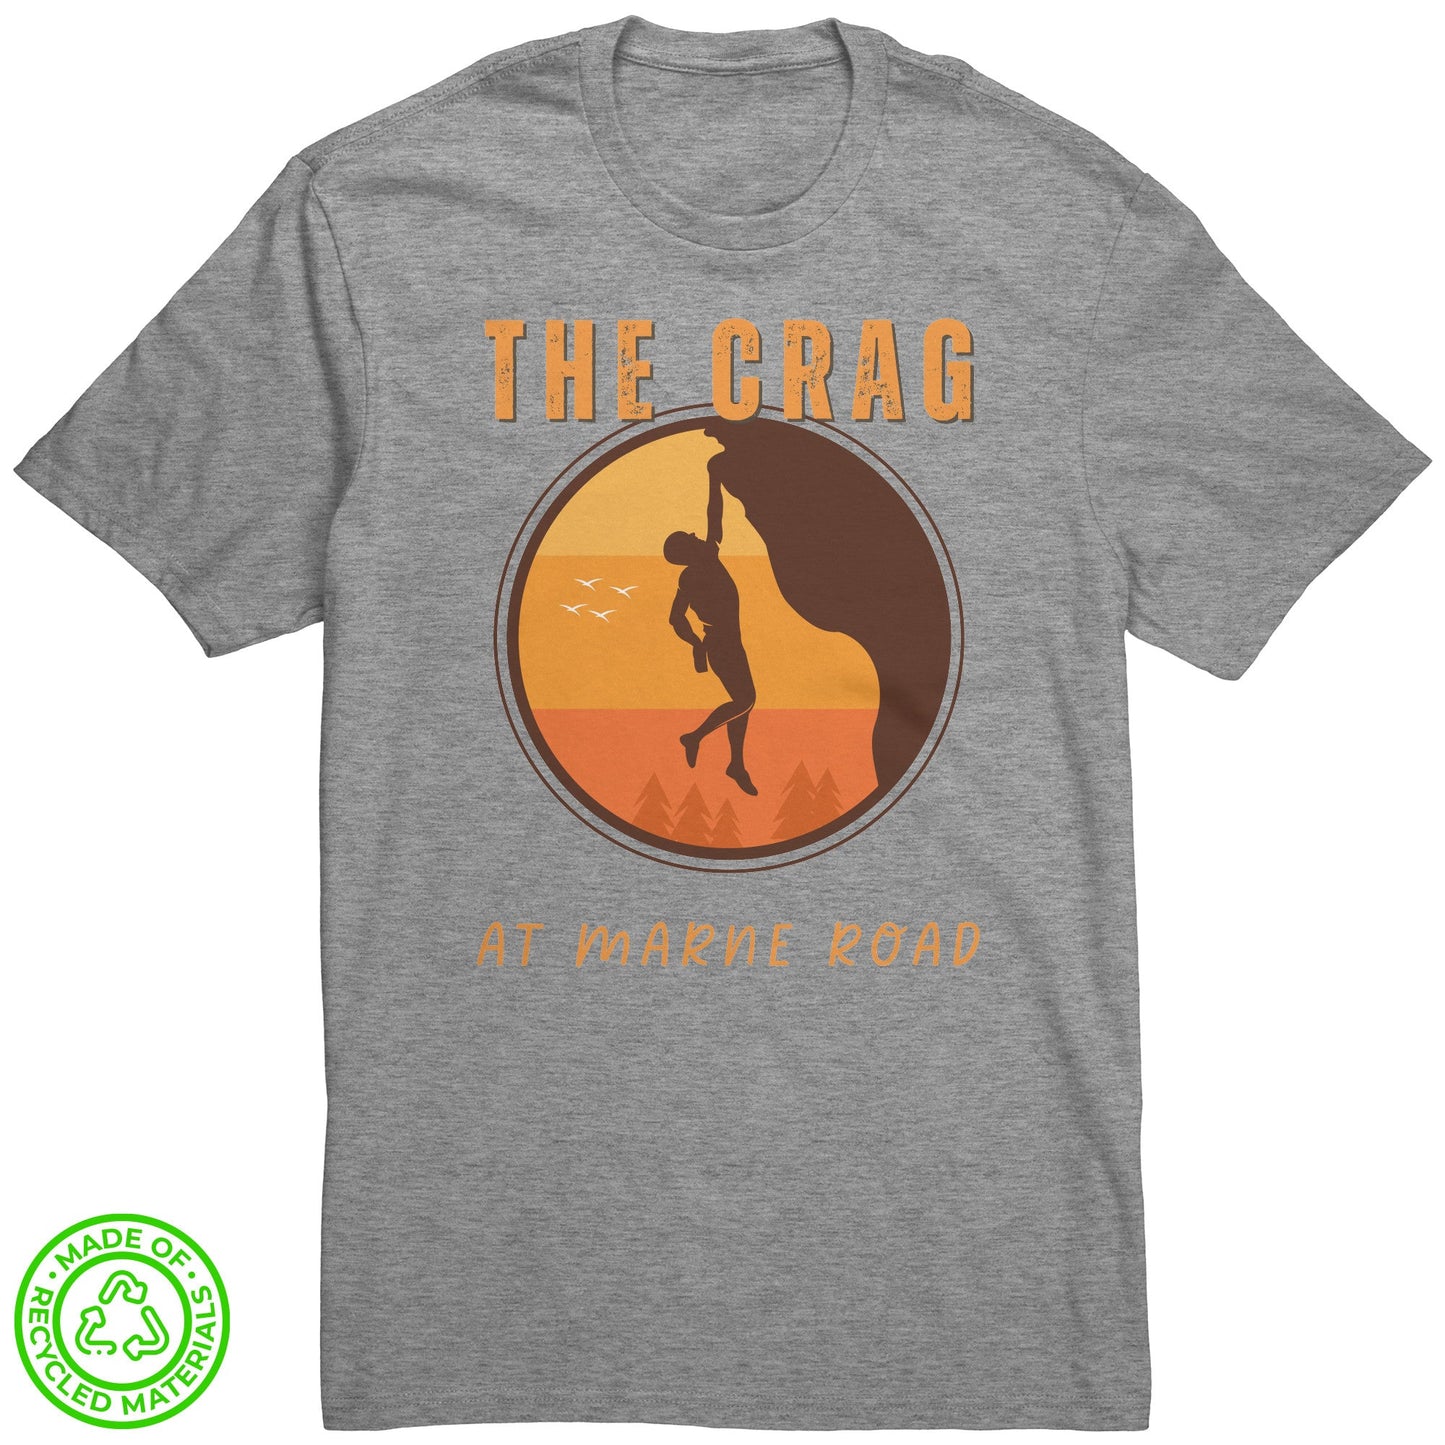 Eco-Friendly Re-Tee (Marne Rd Crag Circle Silhouette)